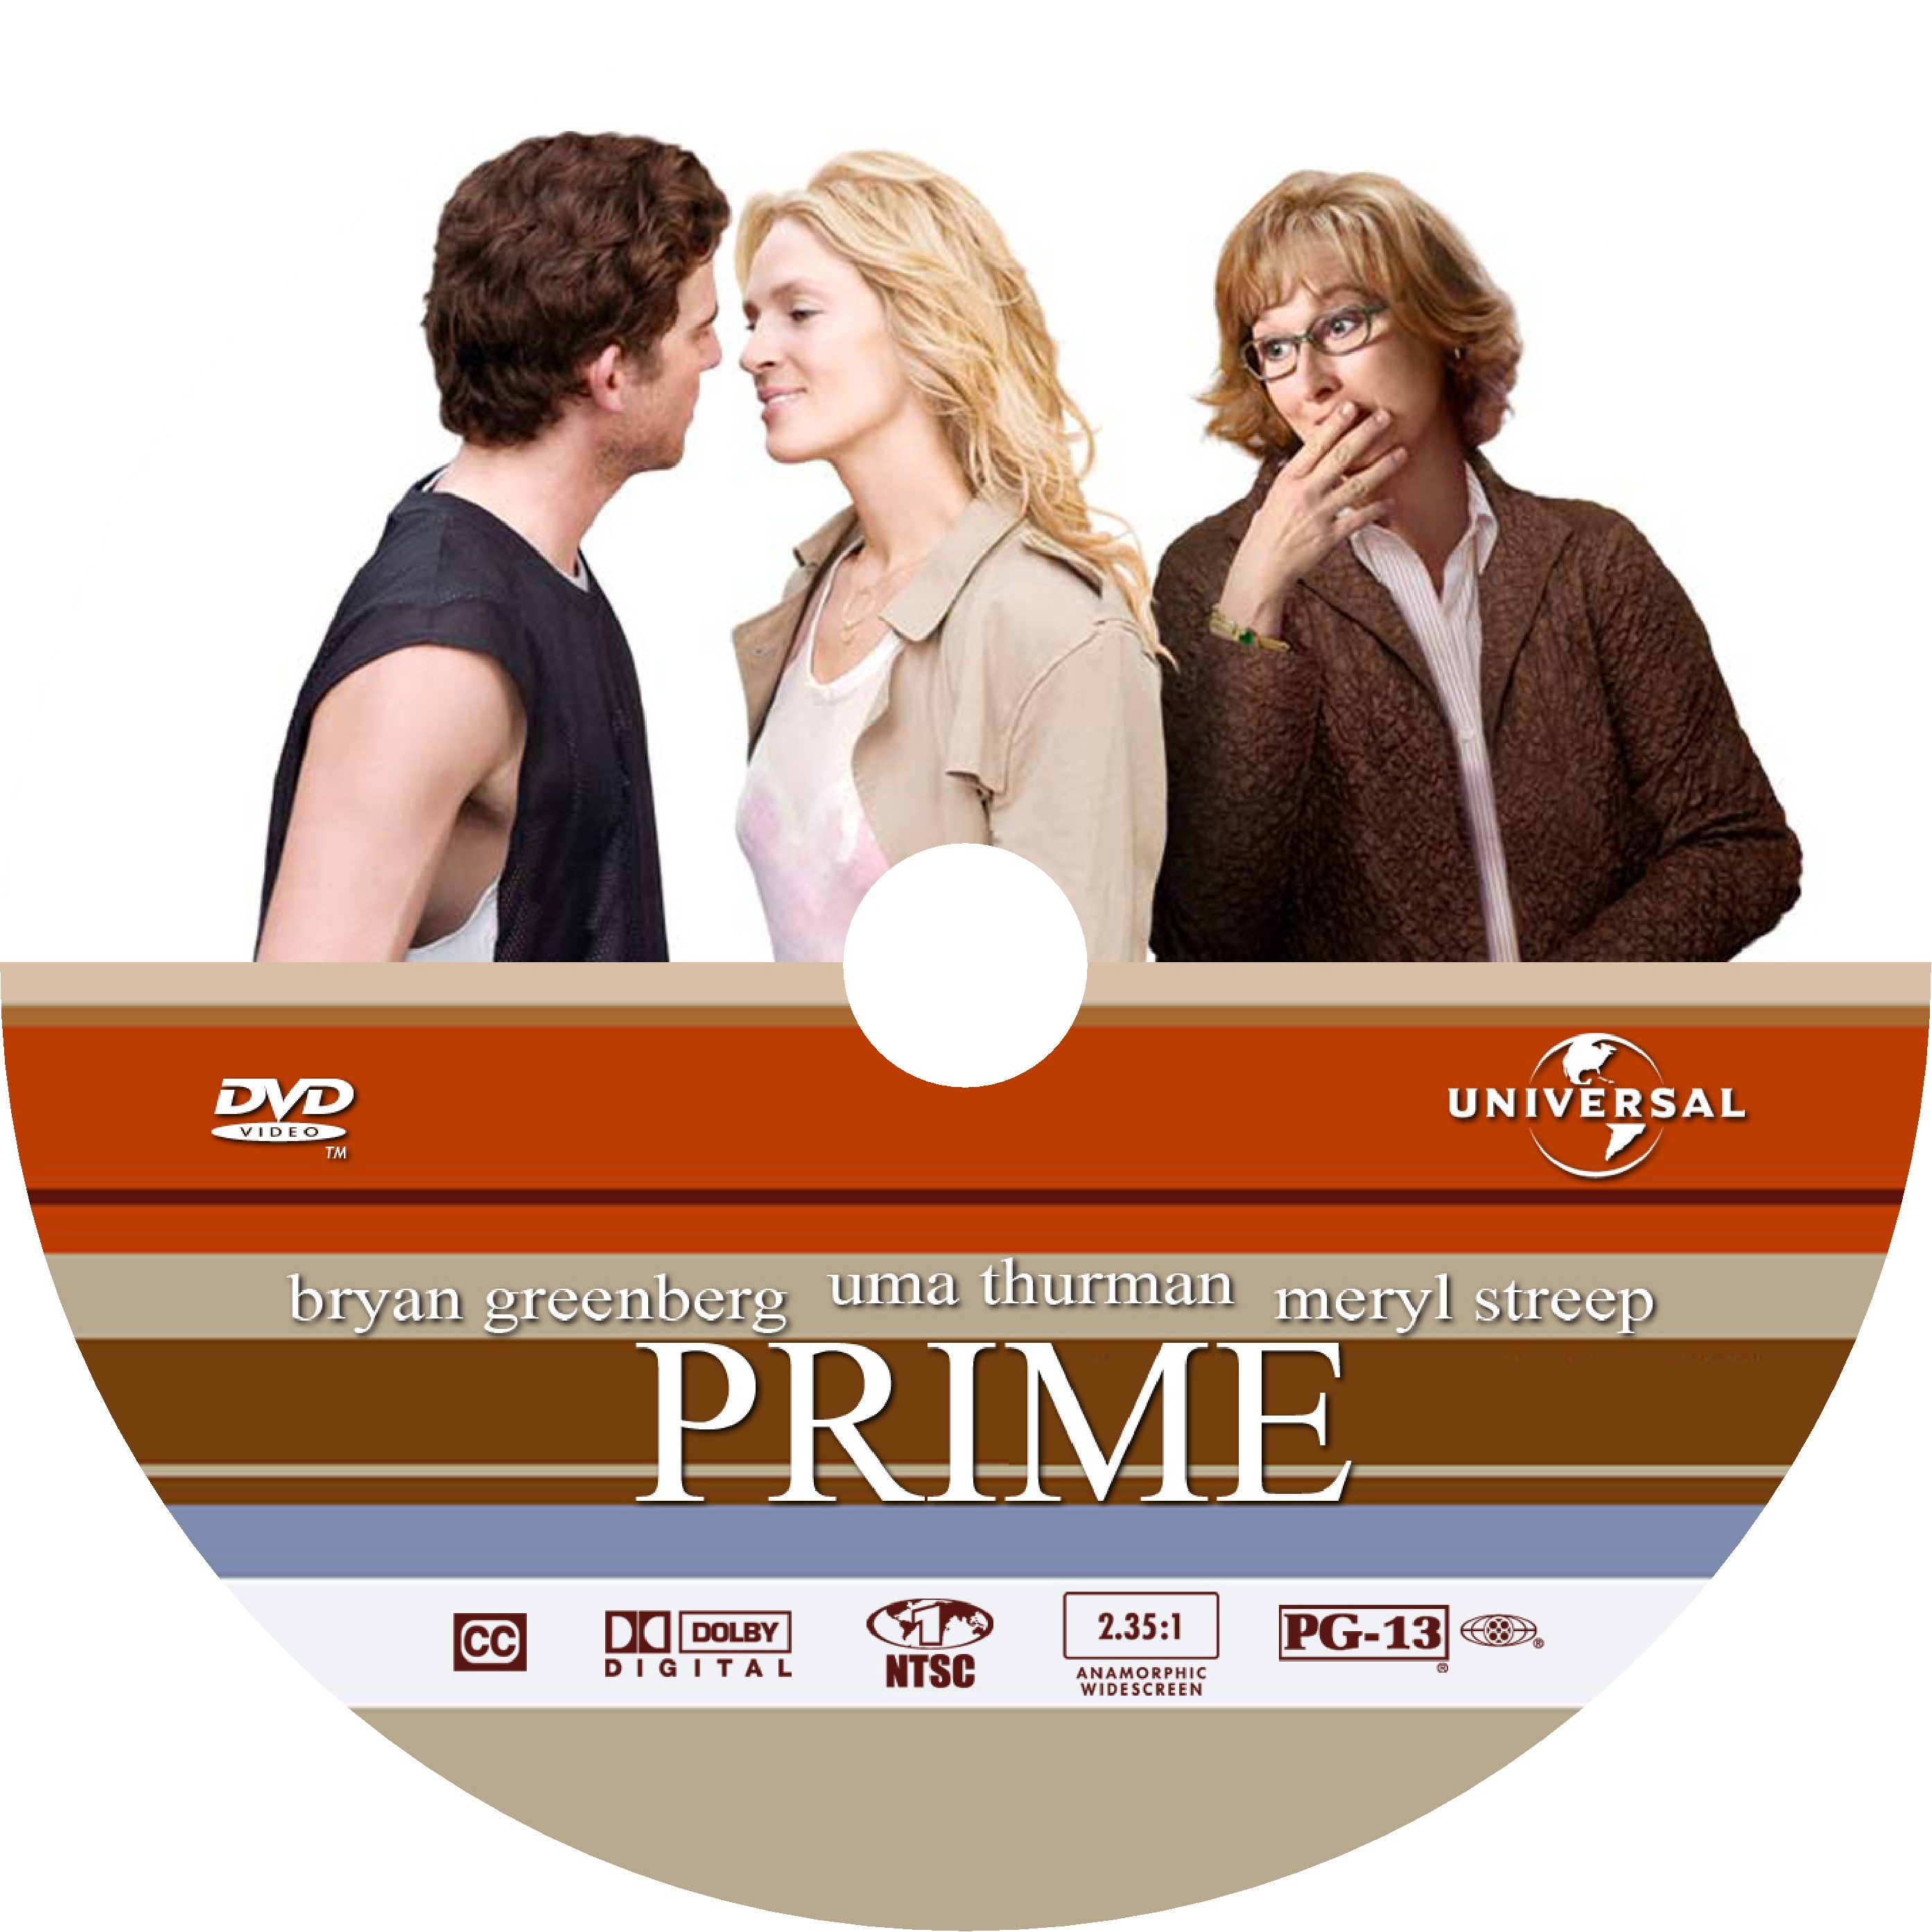 Download Prime 2005 Full Hd Quality